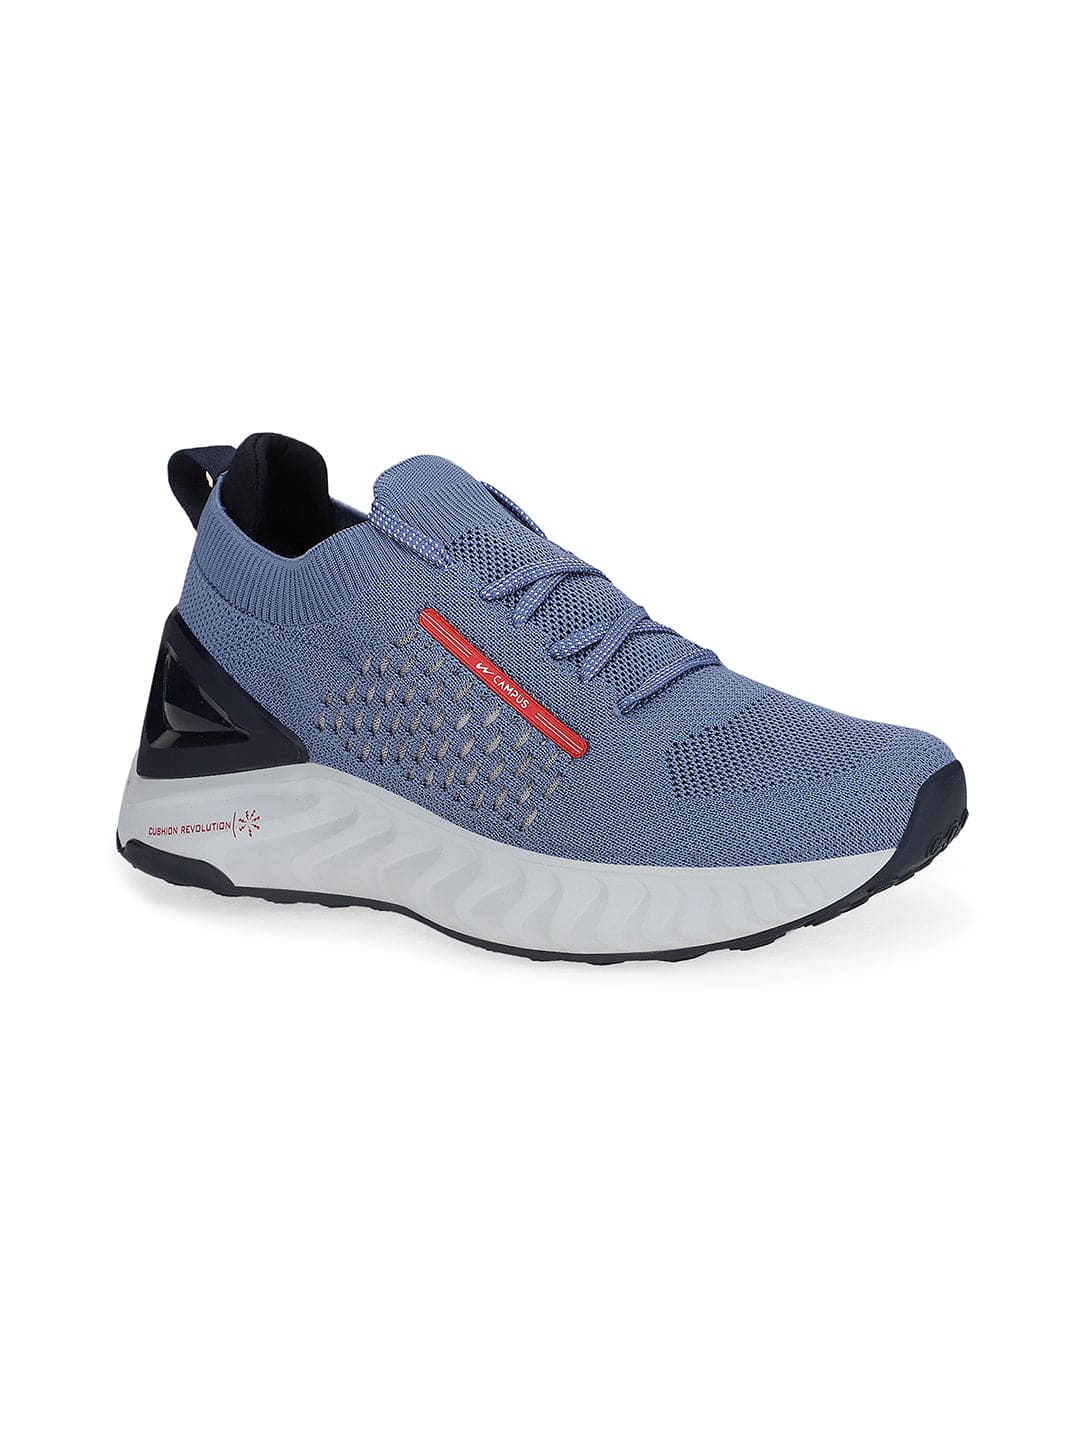 Discover 191+ sneakers for men paytm